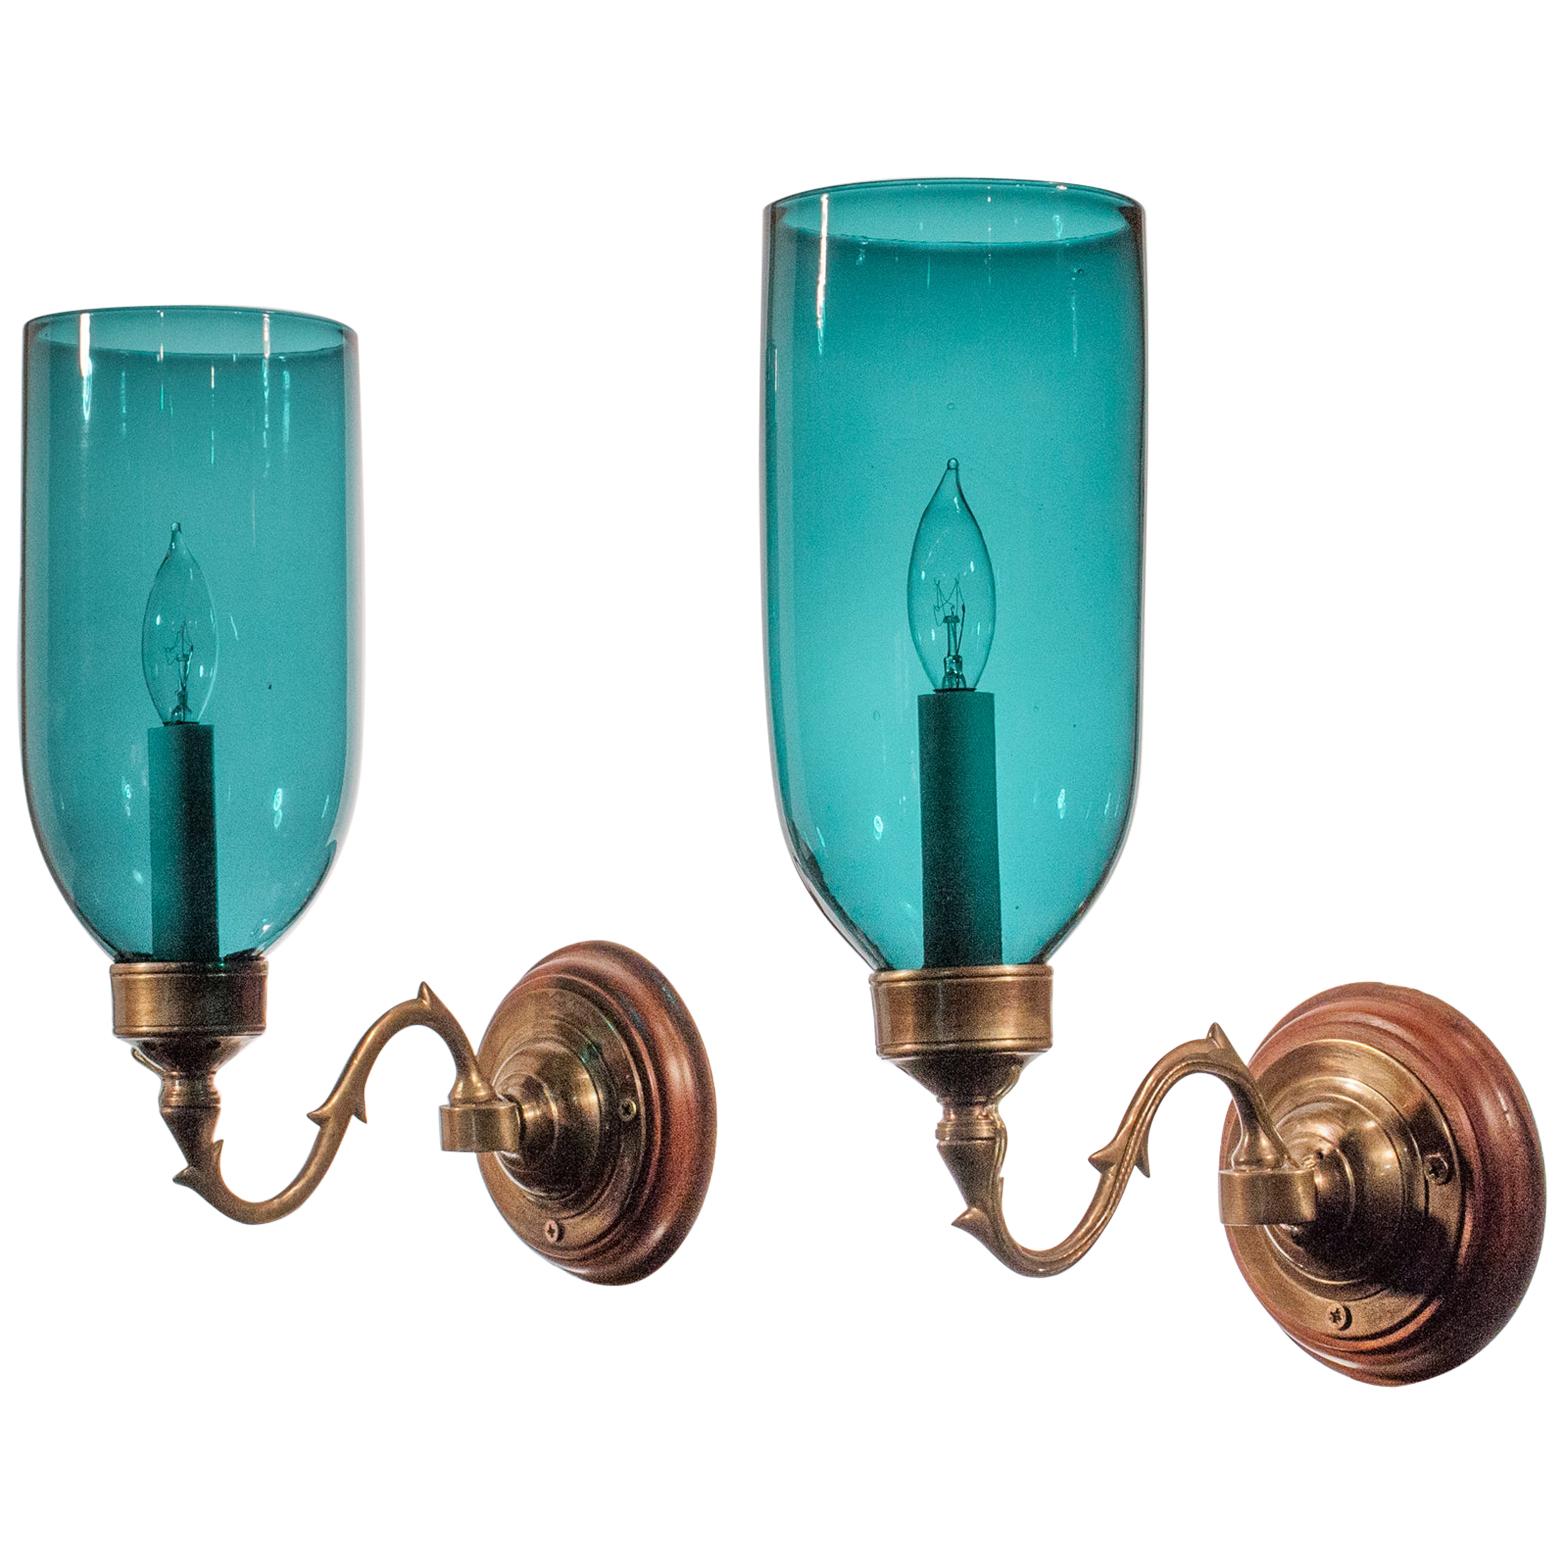 Pair of Blue Green Teal Hurricane Shade Wall Sconces